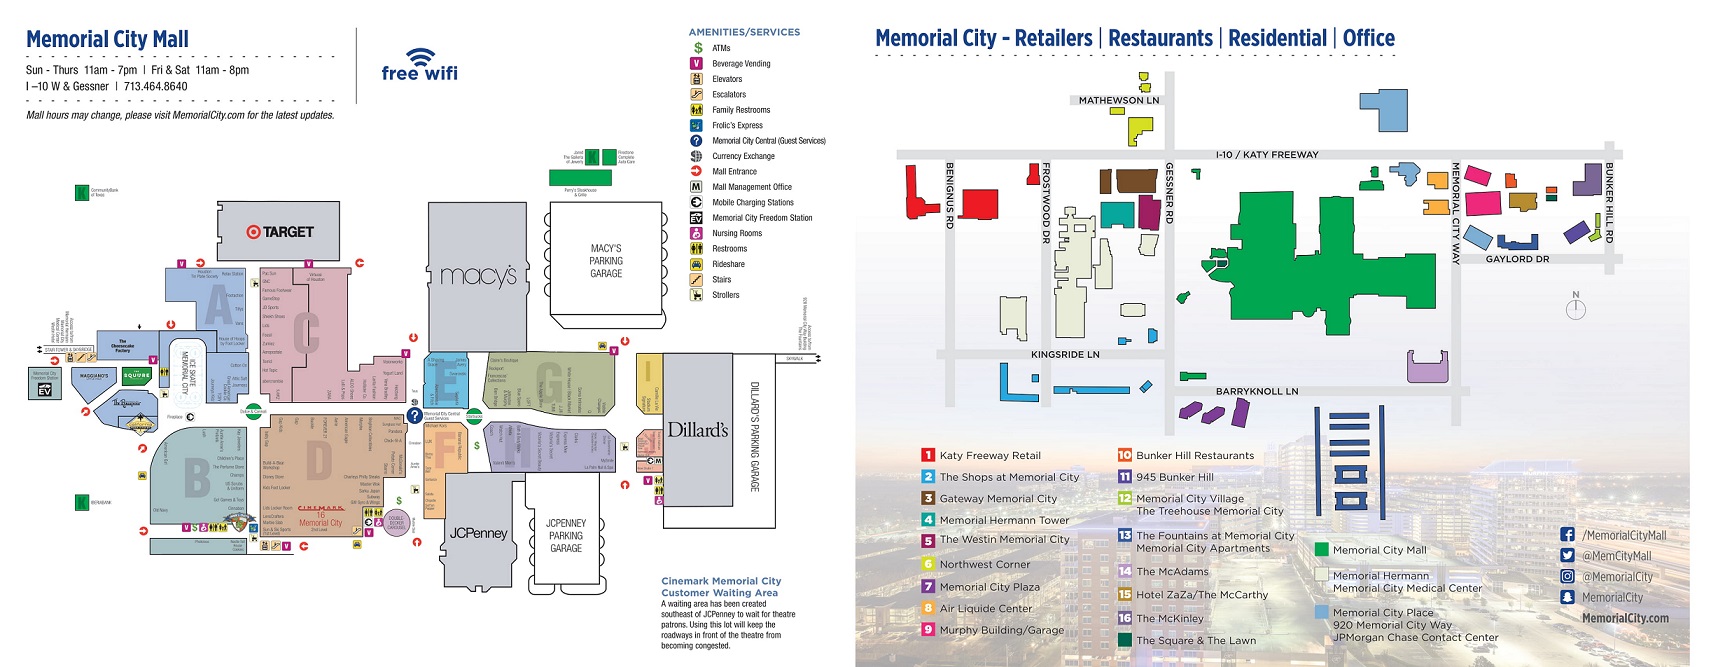 Map Of Memorial City Mall Memorial City Mall (237 Stores) - Shopping In Houston, Texas Tx 77024 -  Mallscenters